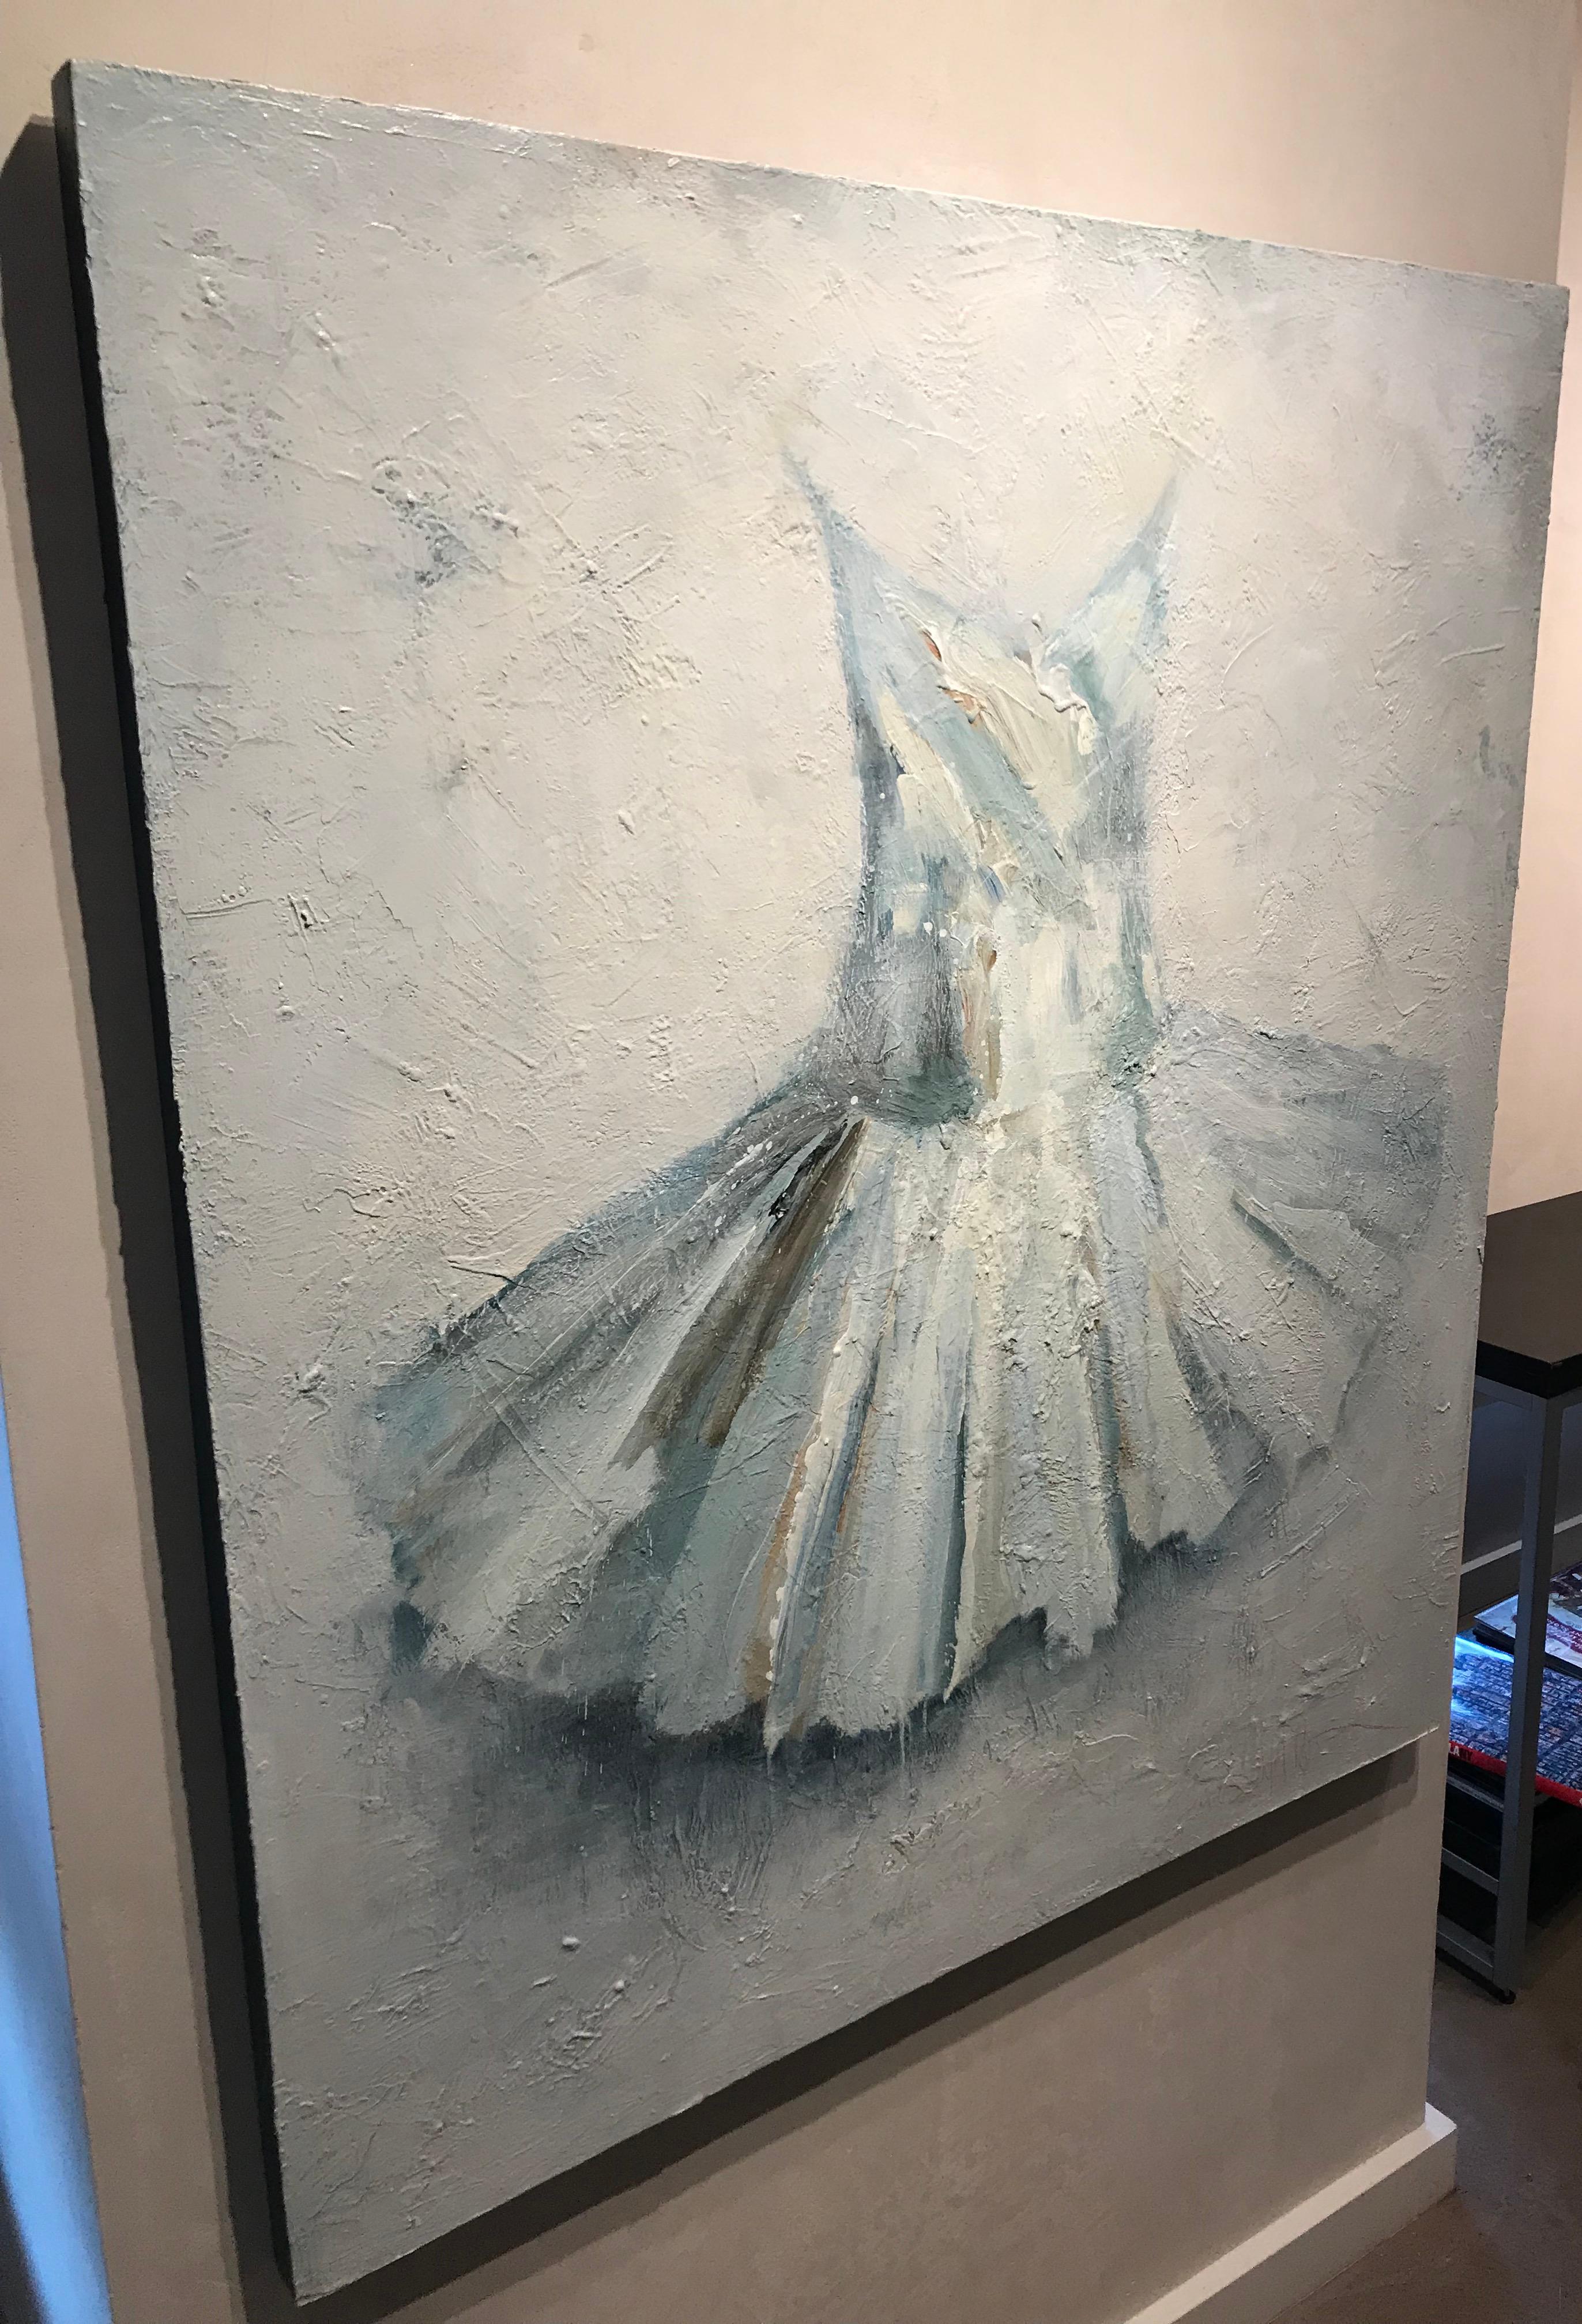 This acrylic on panel painting in blues and whites is part of Laura Schiff Bean's dress portraits. Influenced by Jim Dine, Bean's dresses are her focus and the gestural drips and loose brush strokes make each painting unique. Signed on the lower